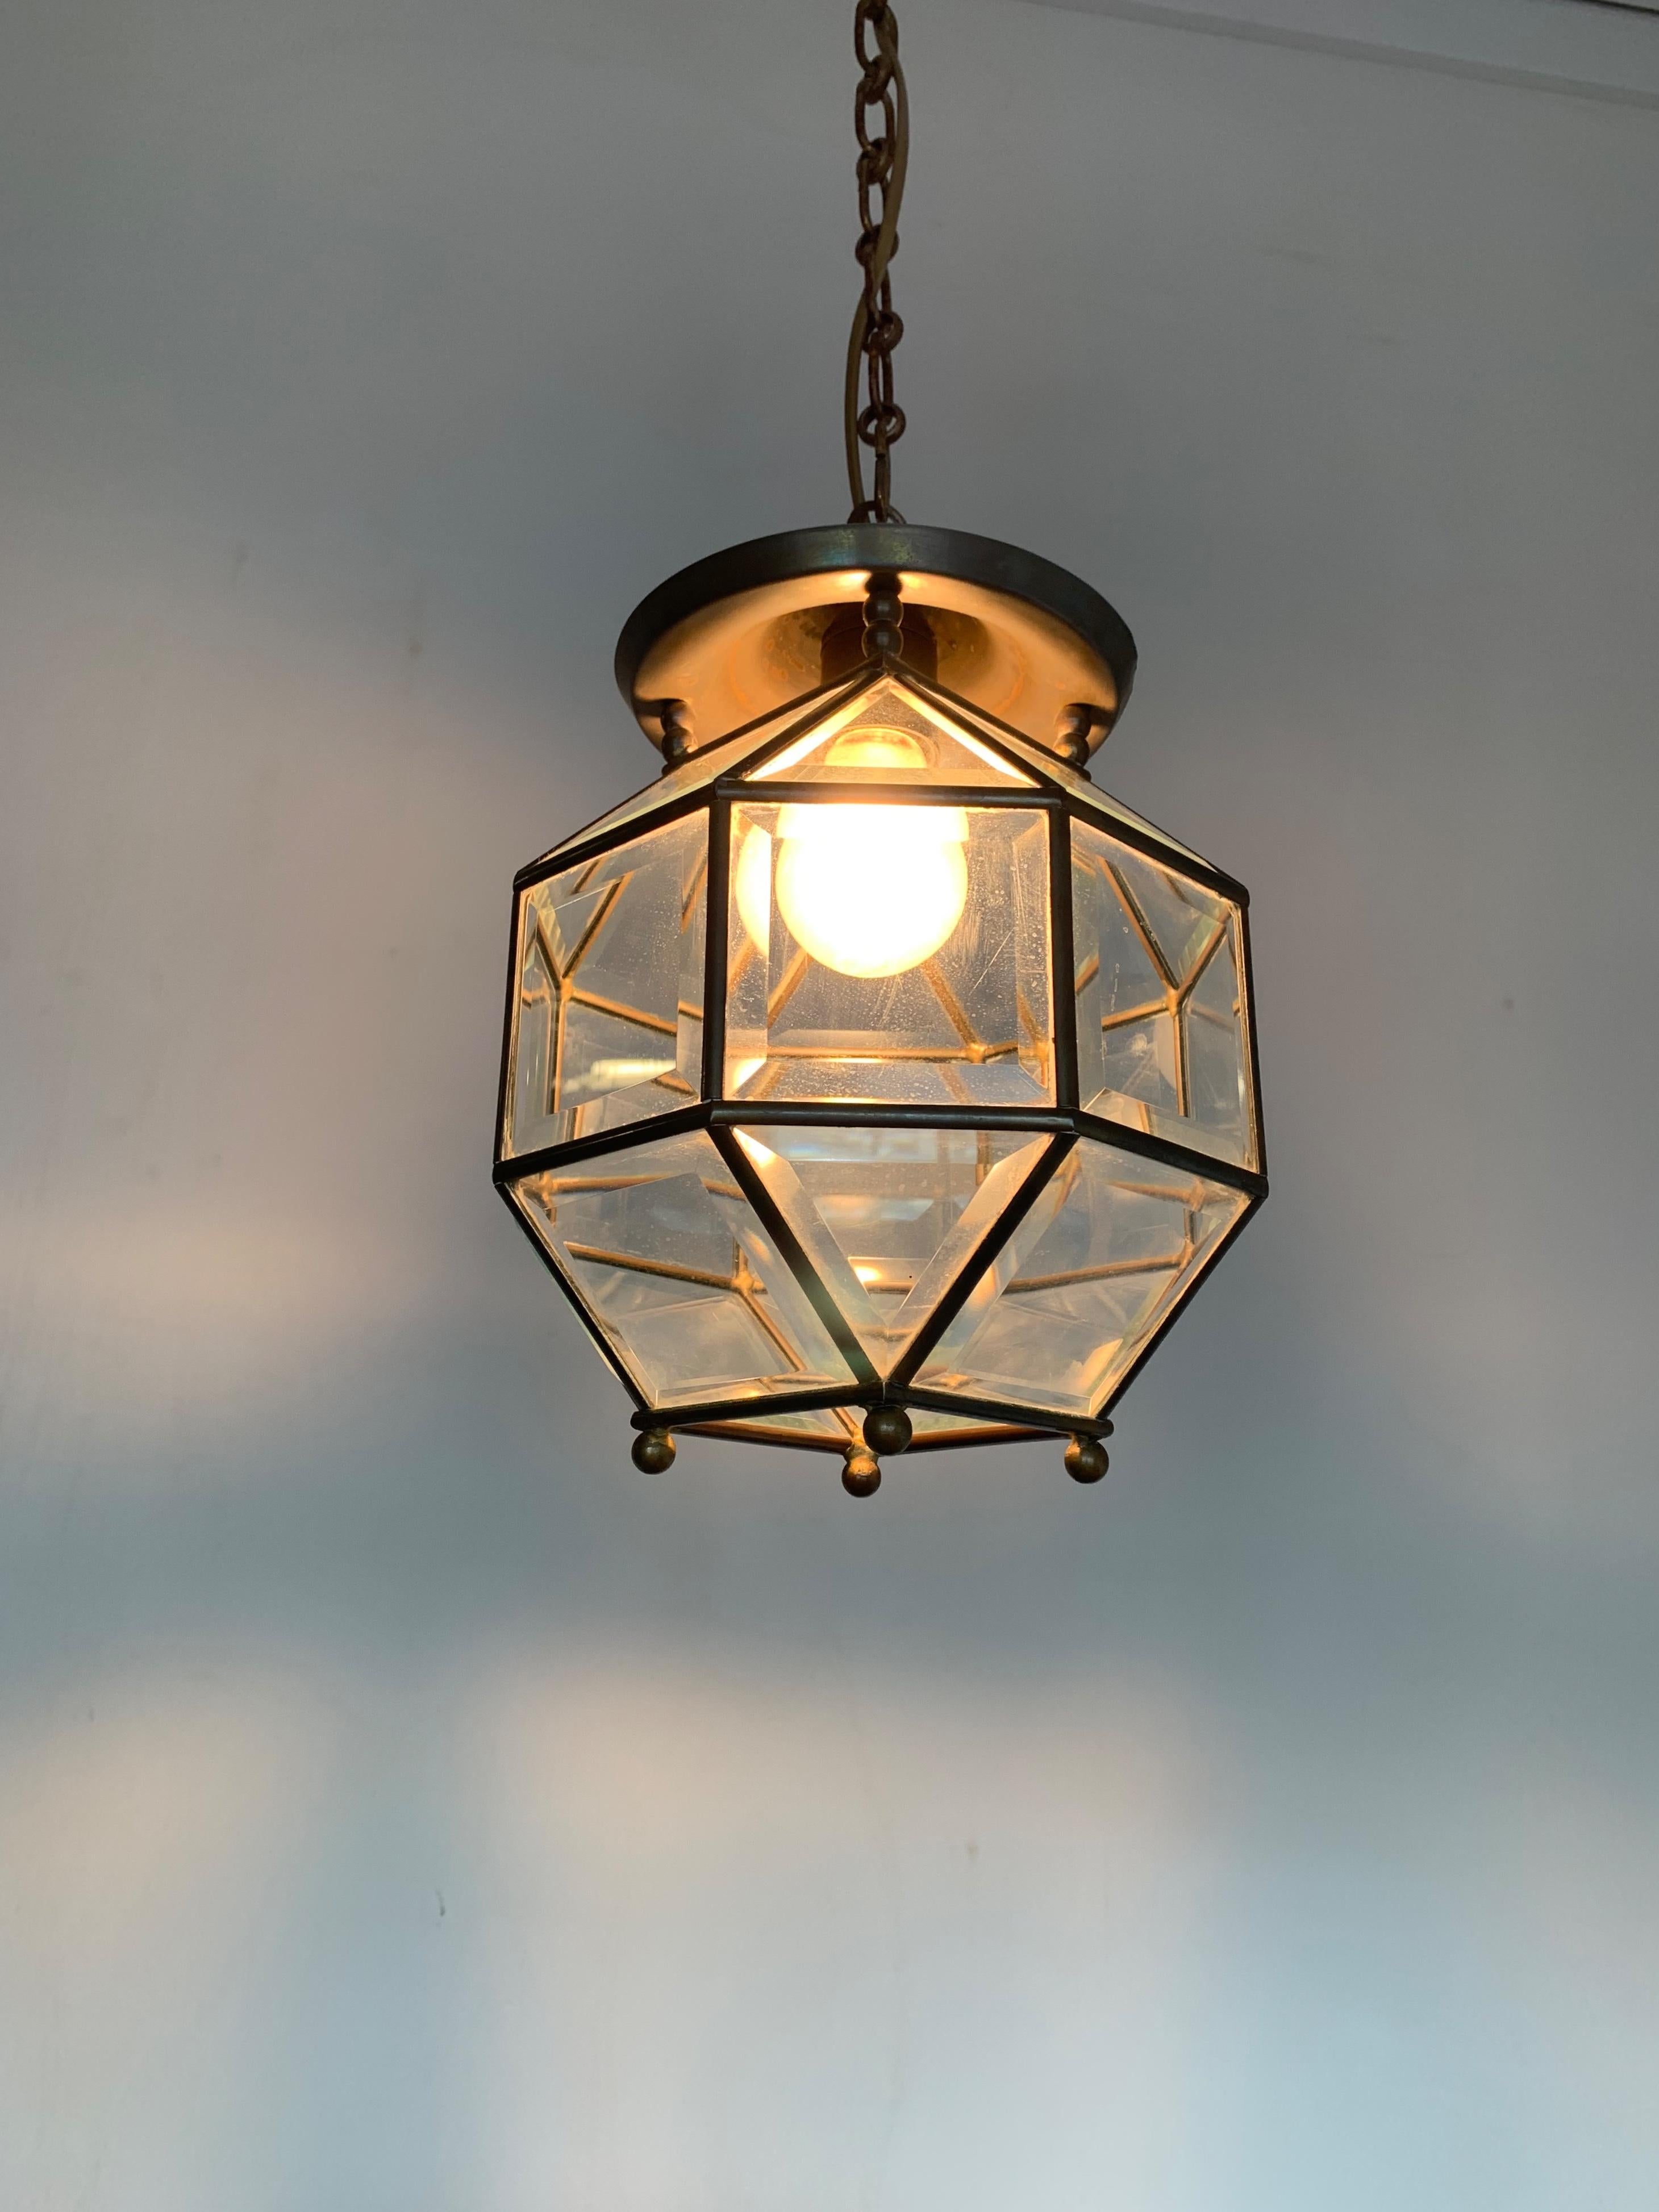 20th Century Early 1900s Beveled Glass and Brass Pendant Cubic Adolf Loos Style Ceiling Light